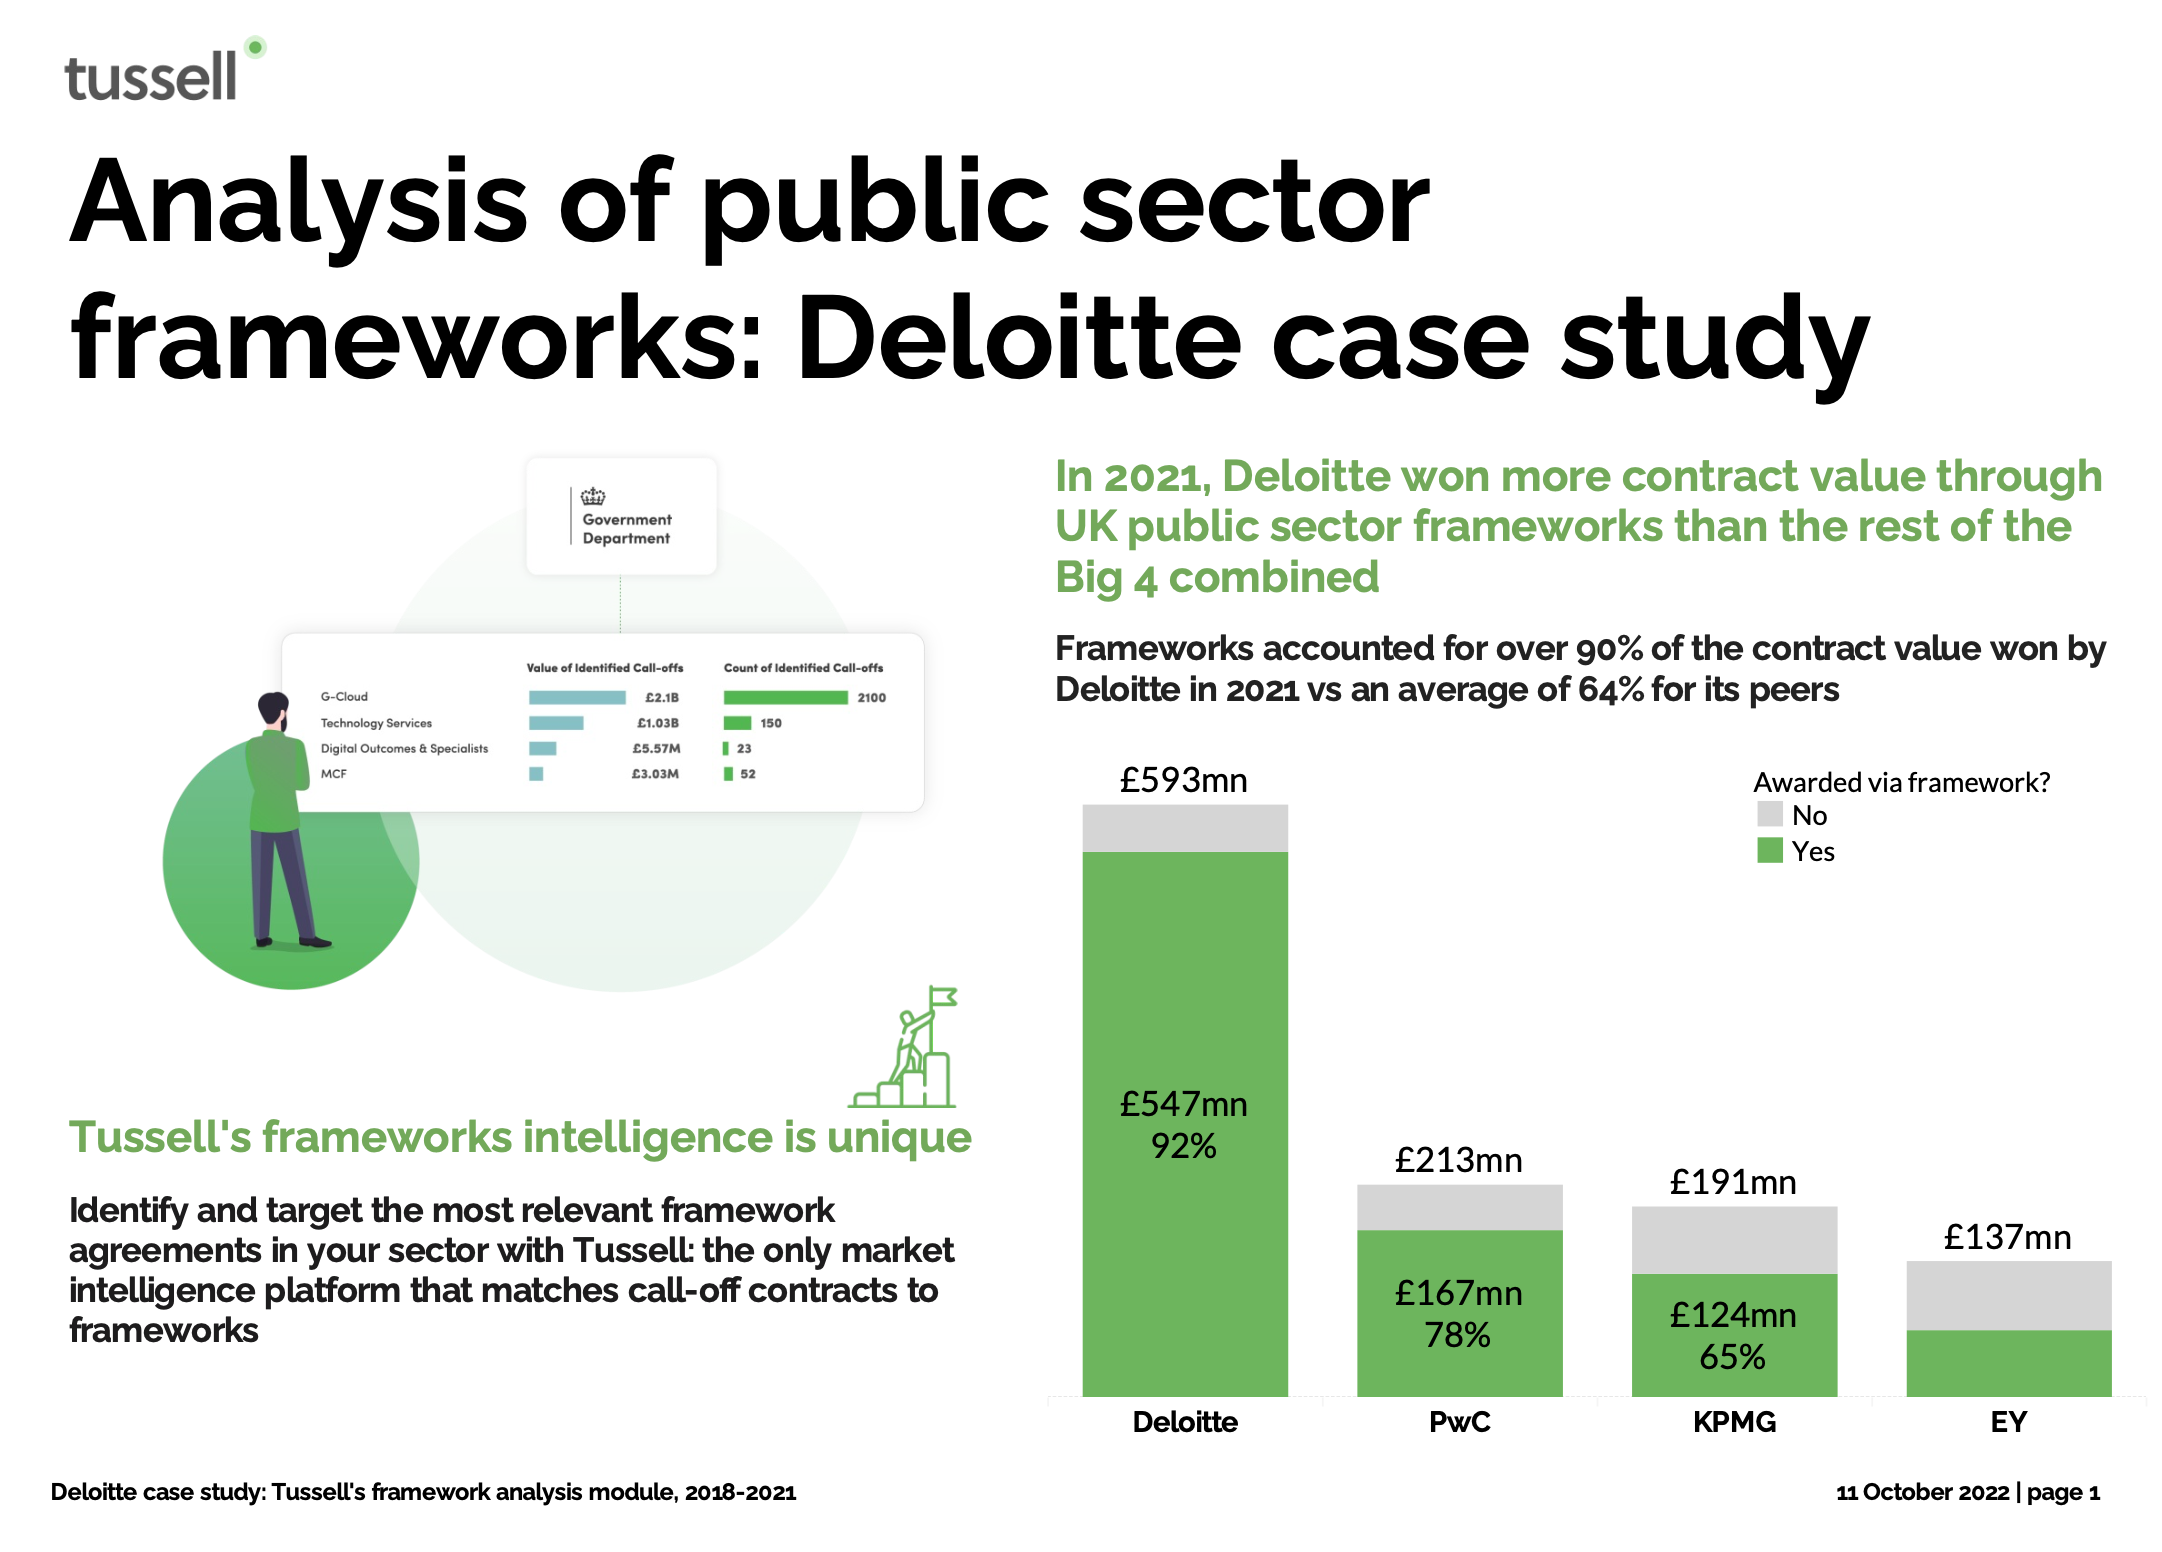 how to solve deloitte case study